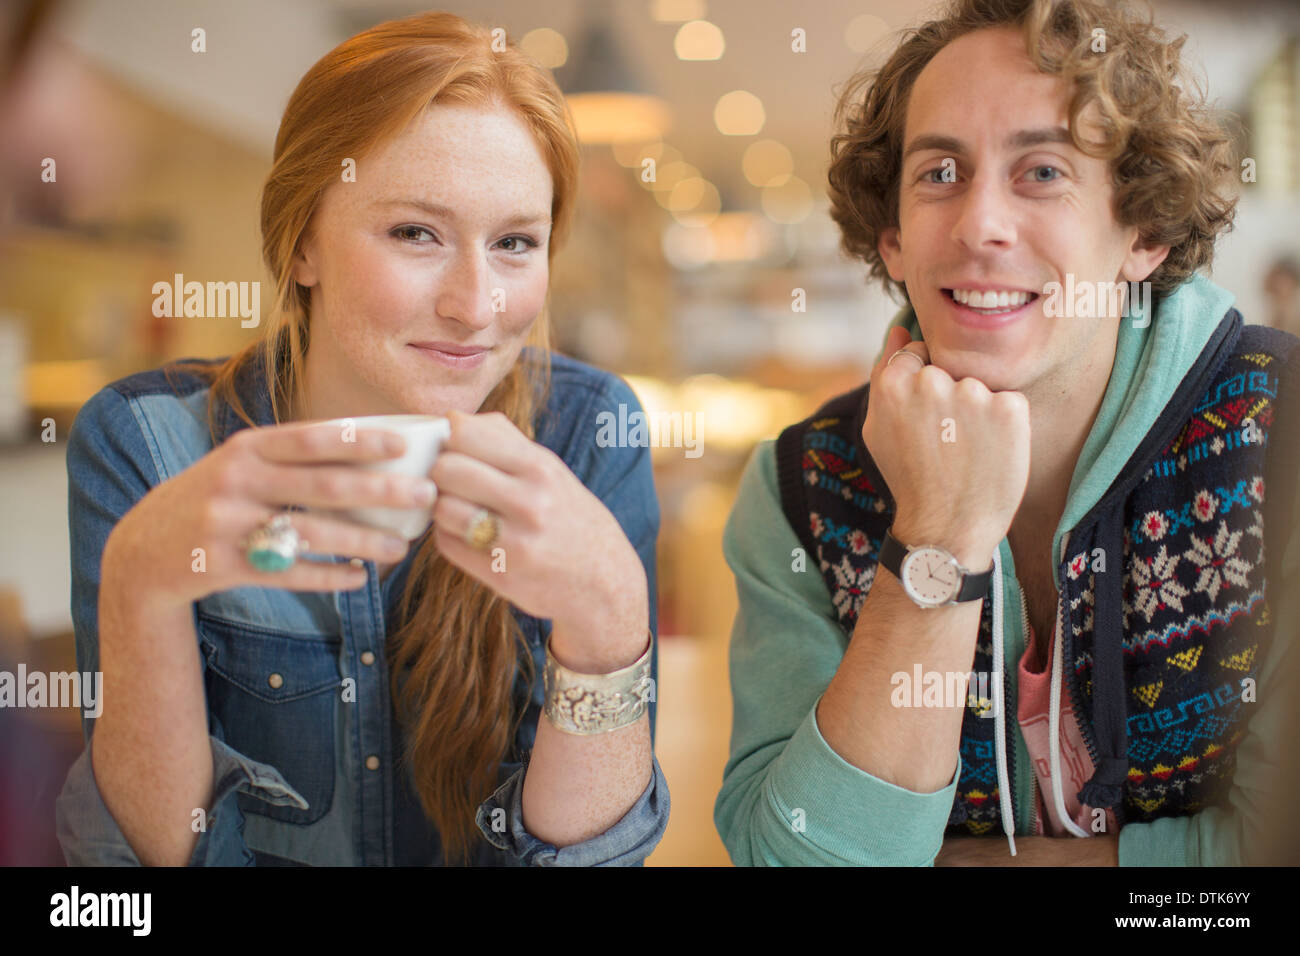 Couple smiling together in cafe Stock Photo